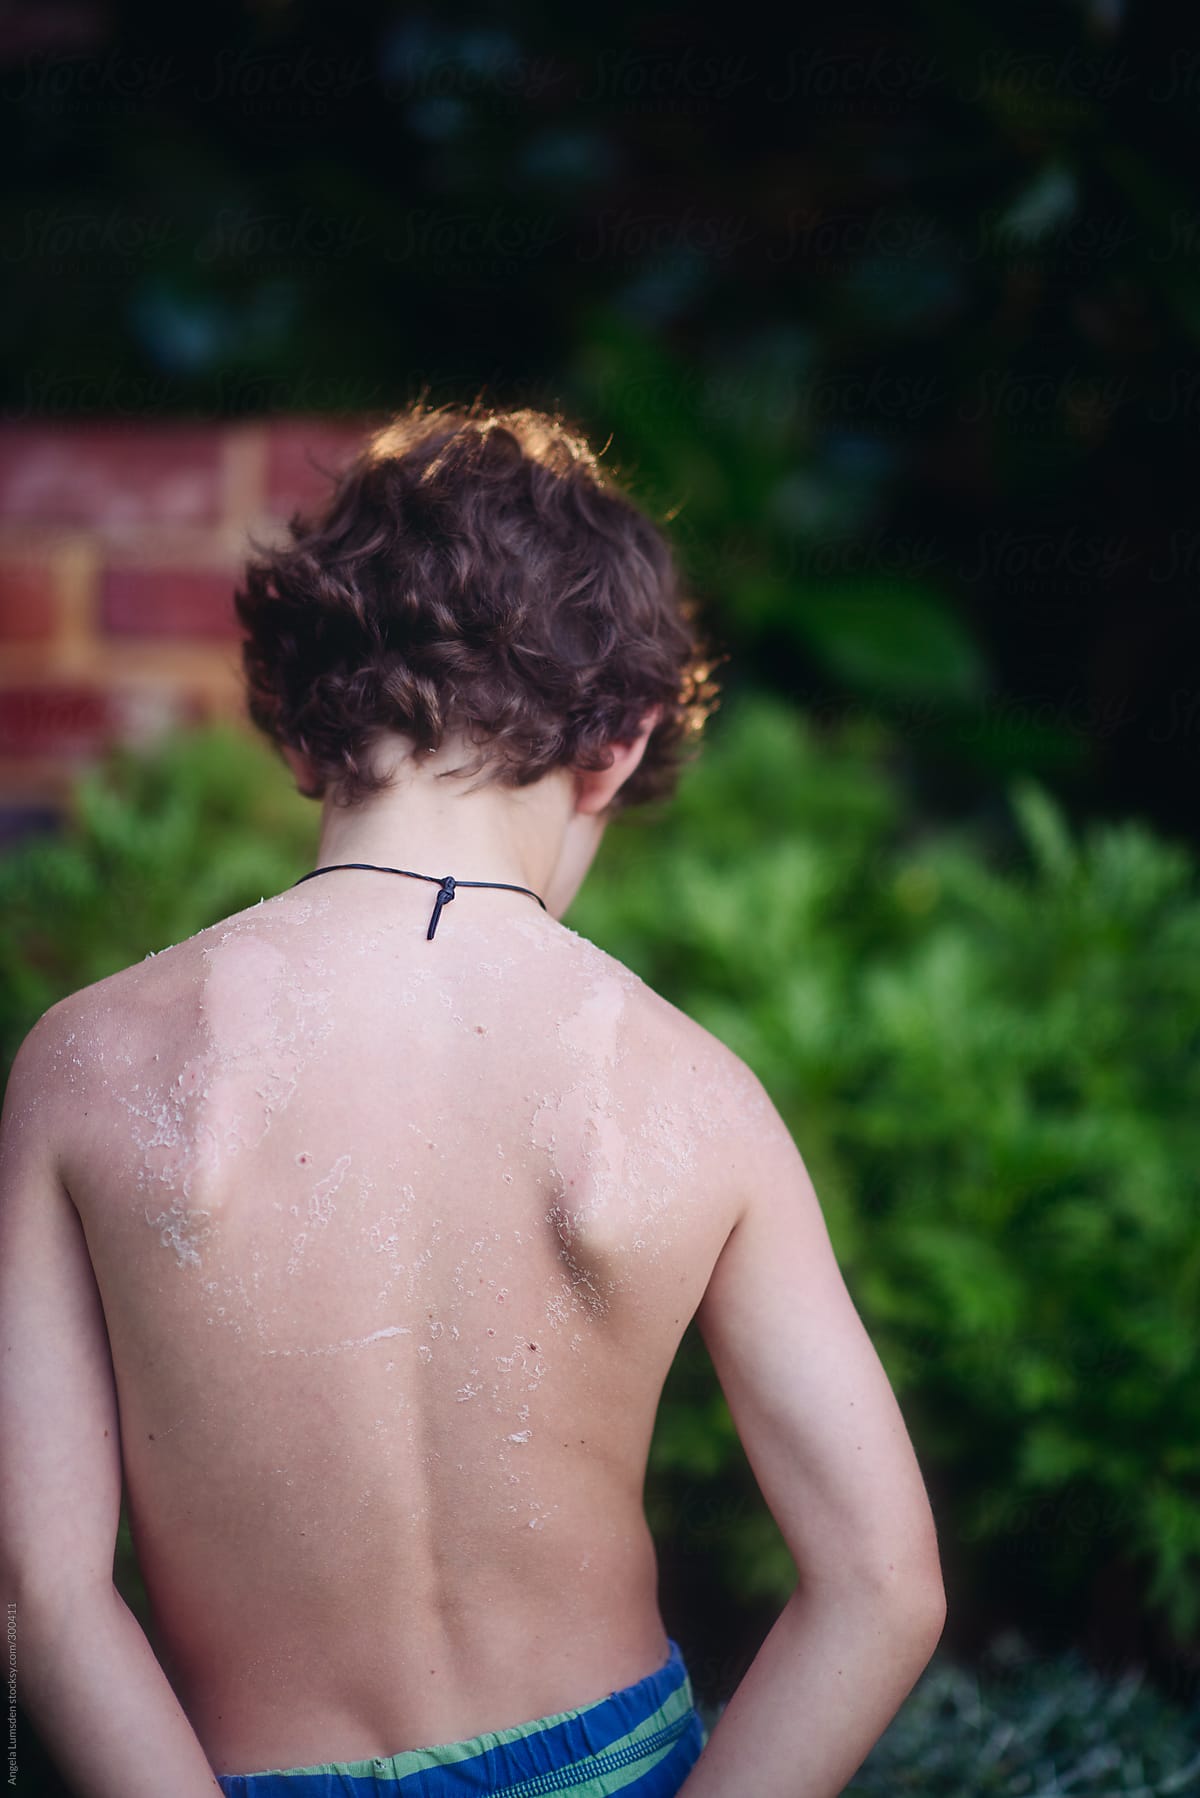 Young boy with a peeling sunburn on his back